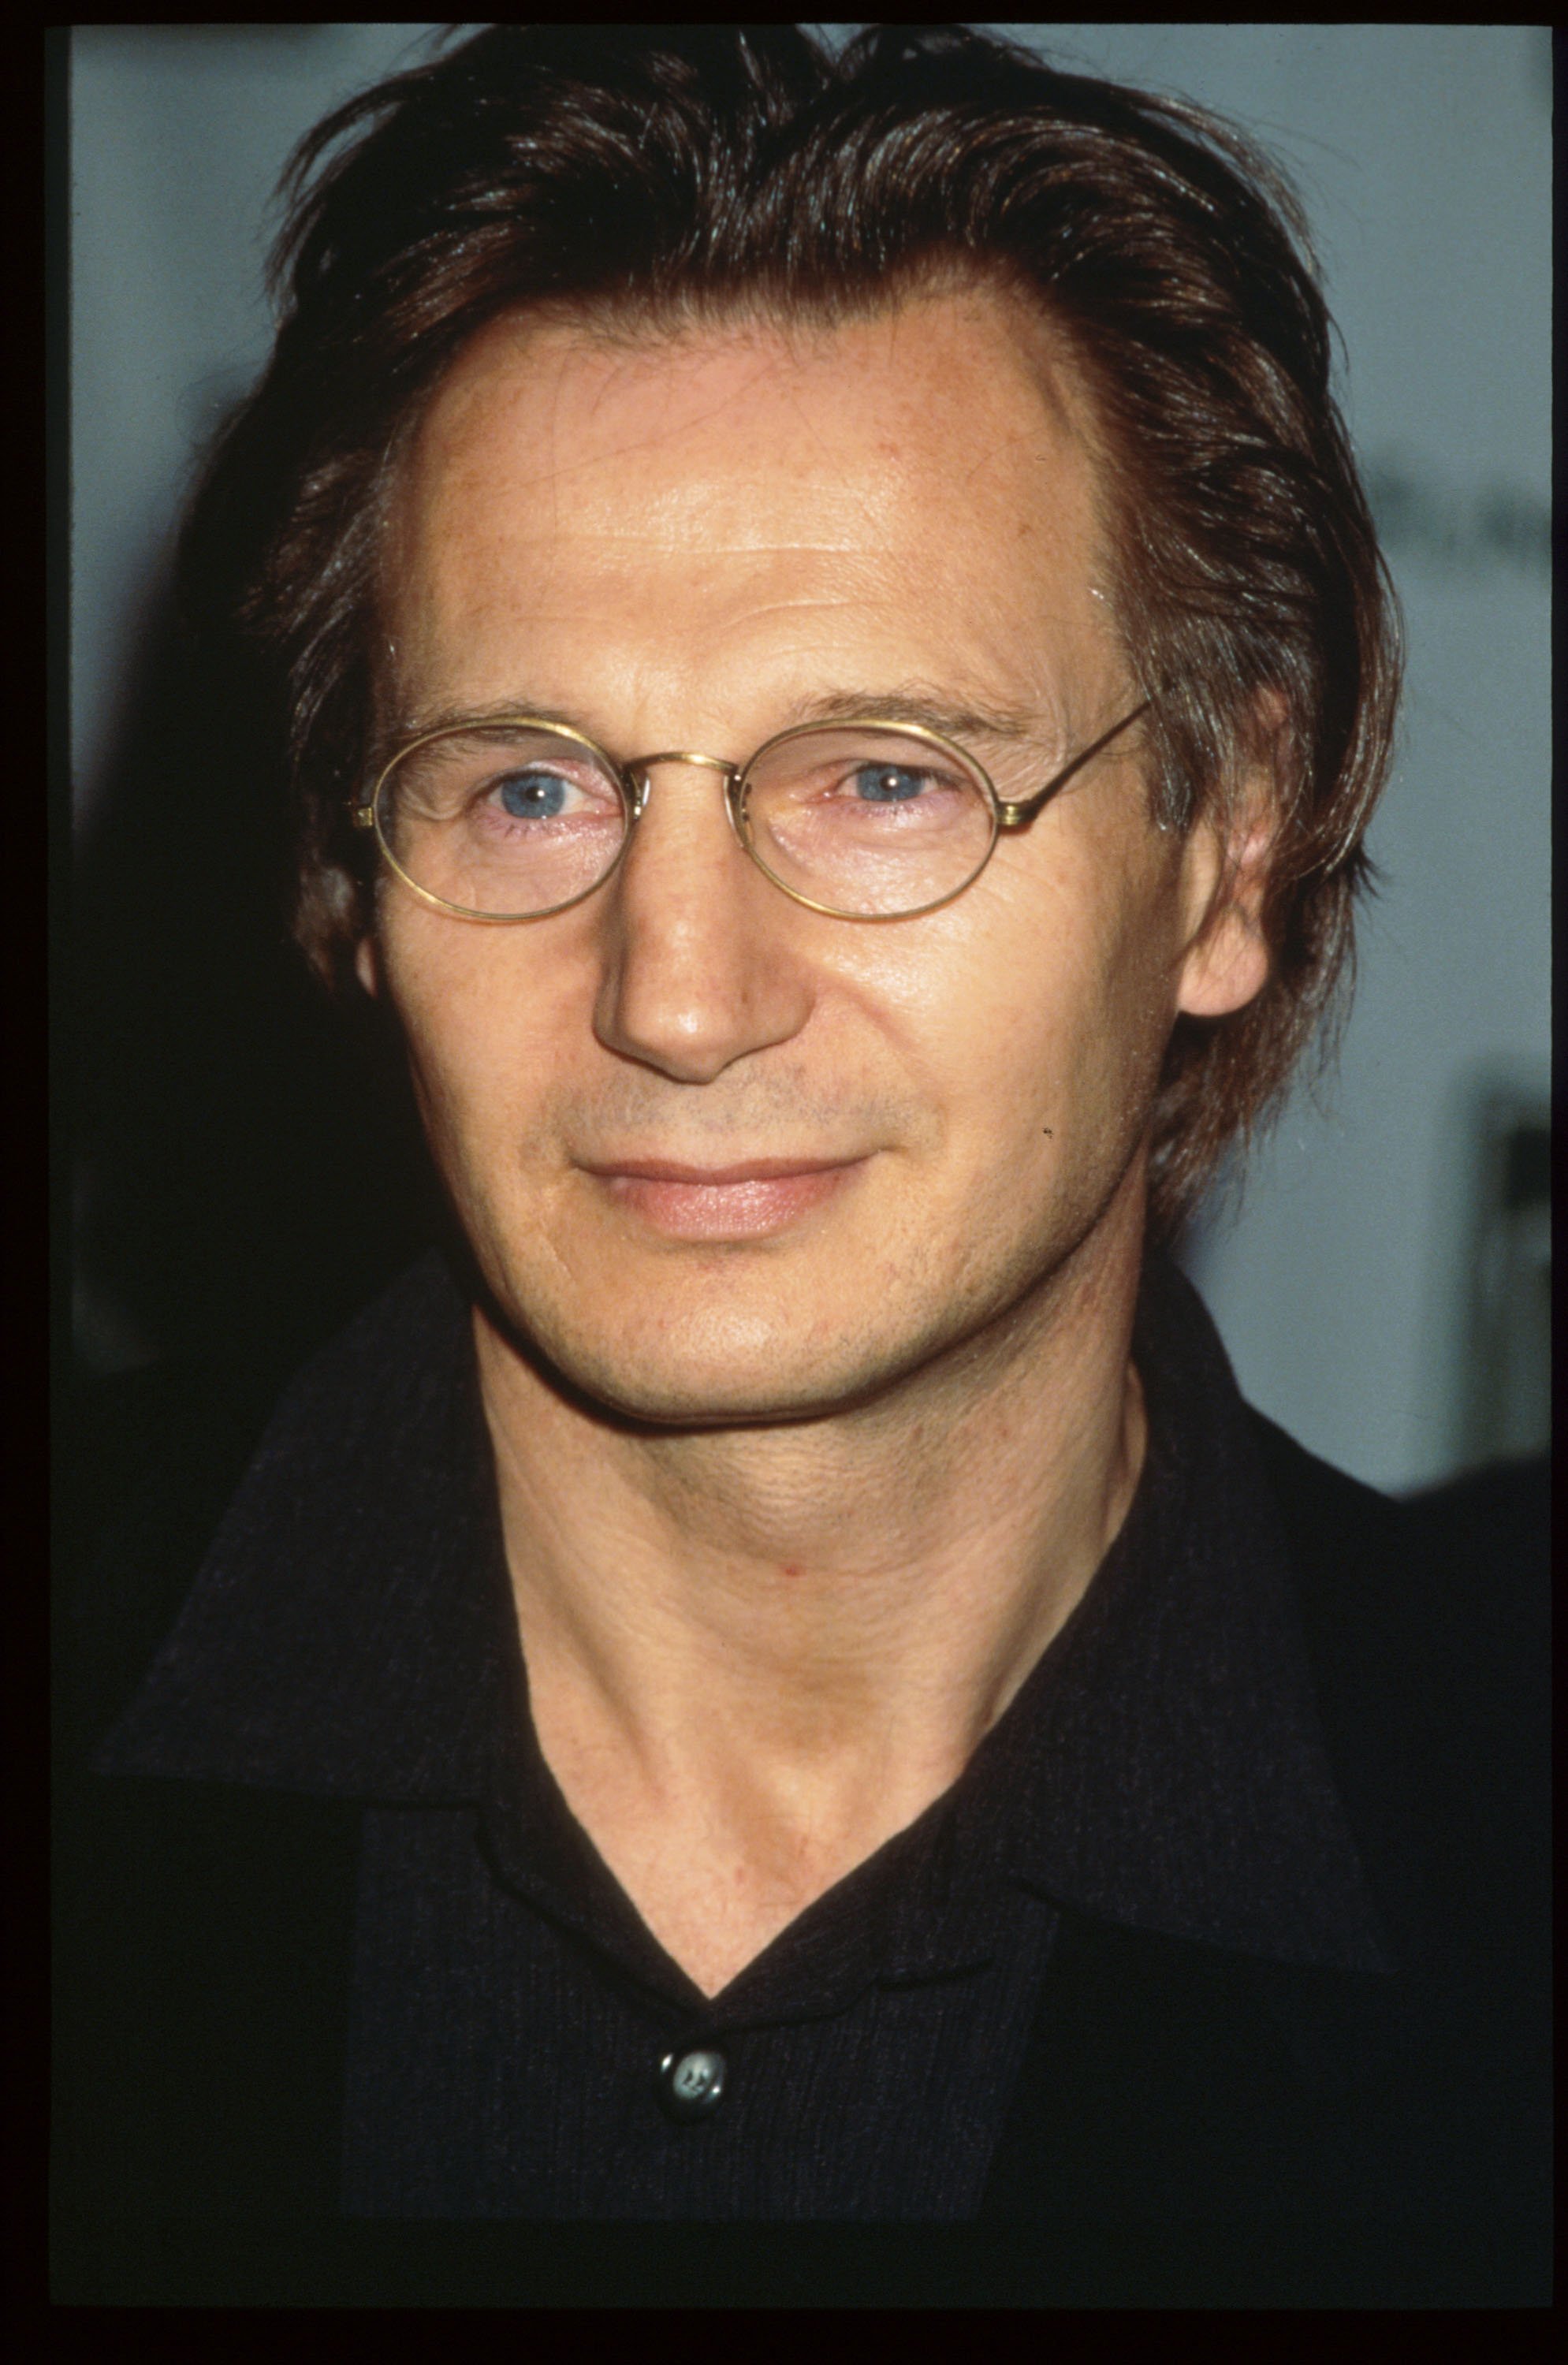 Liam Neeson attends the premiere of "Michael Collins" on October 10, 1996, in New York City. | Source: Getty Images